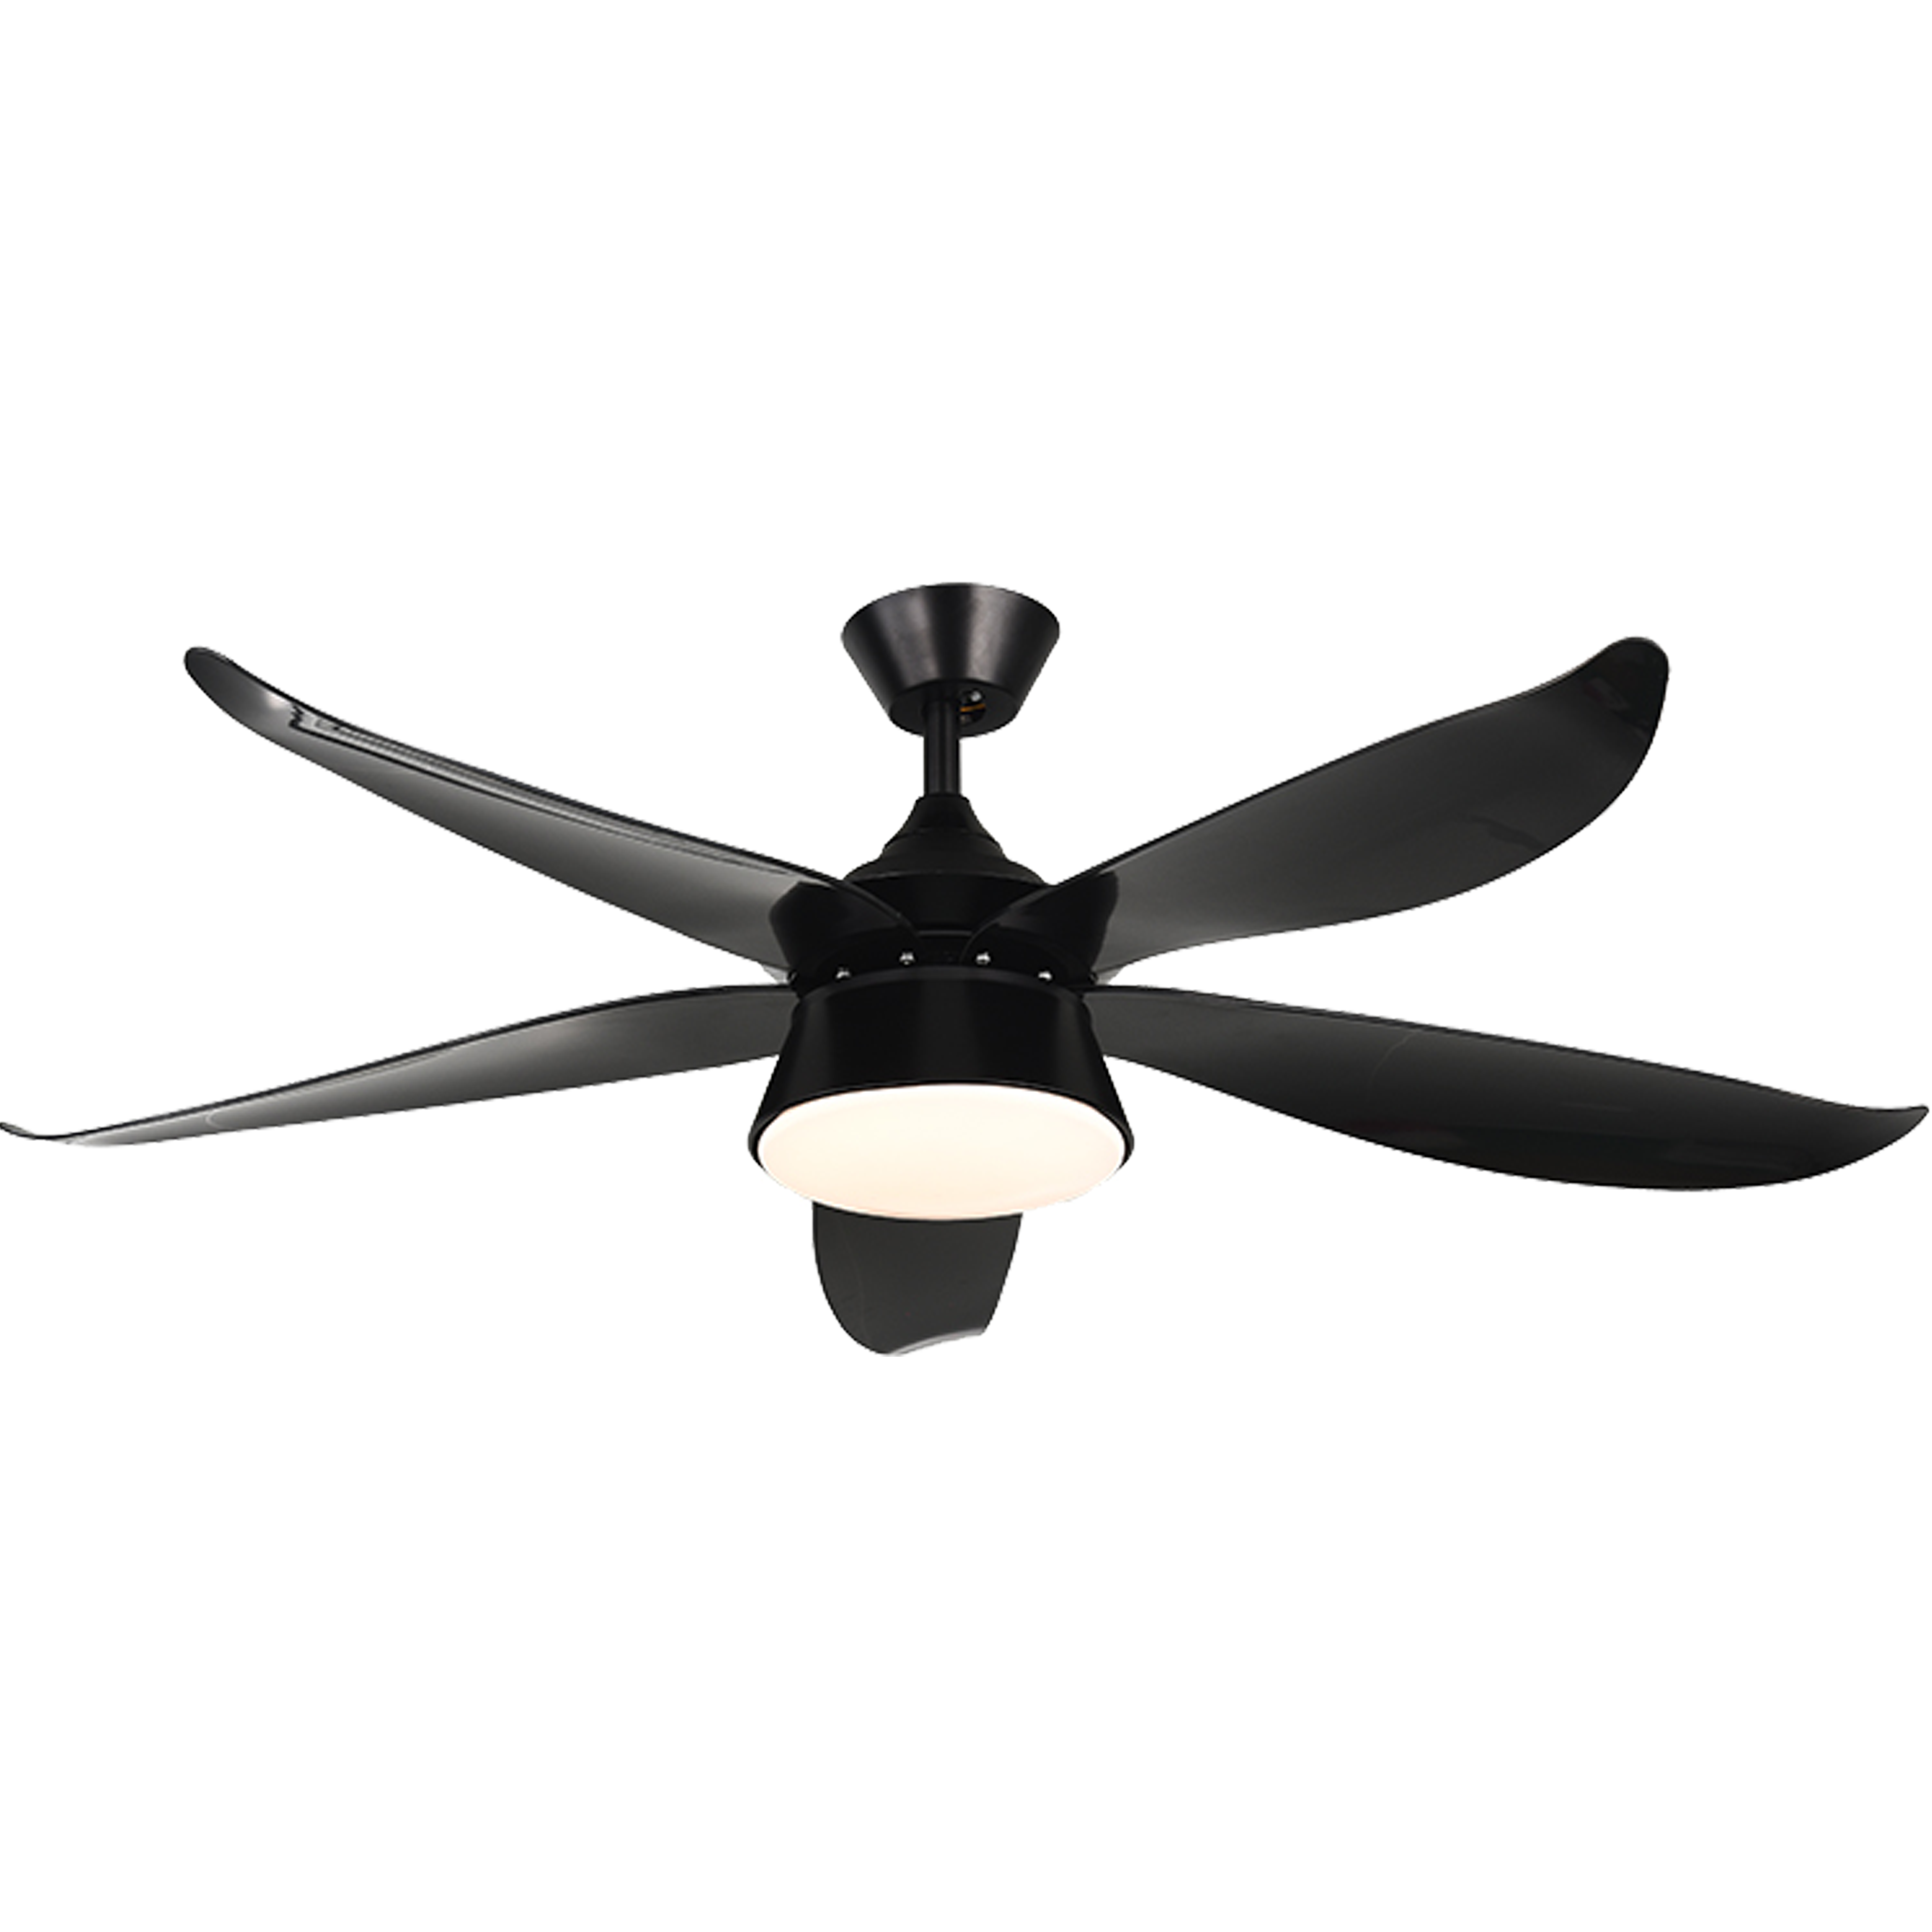 Dining Room Ceiling Fan Light Kits with Remote Control